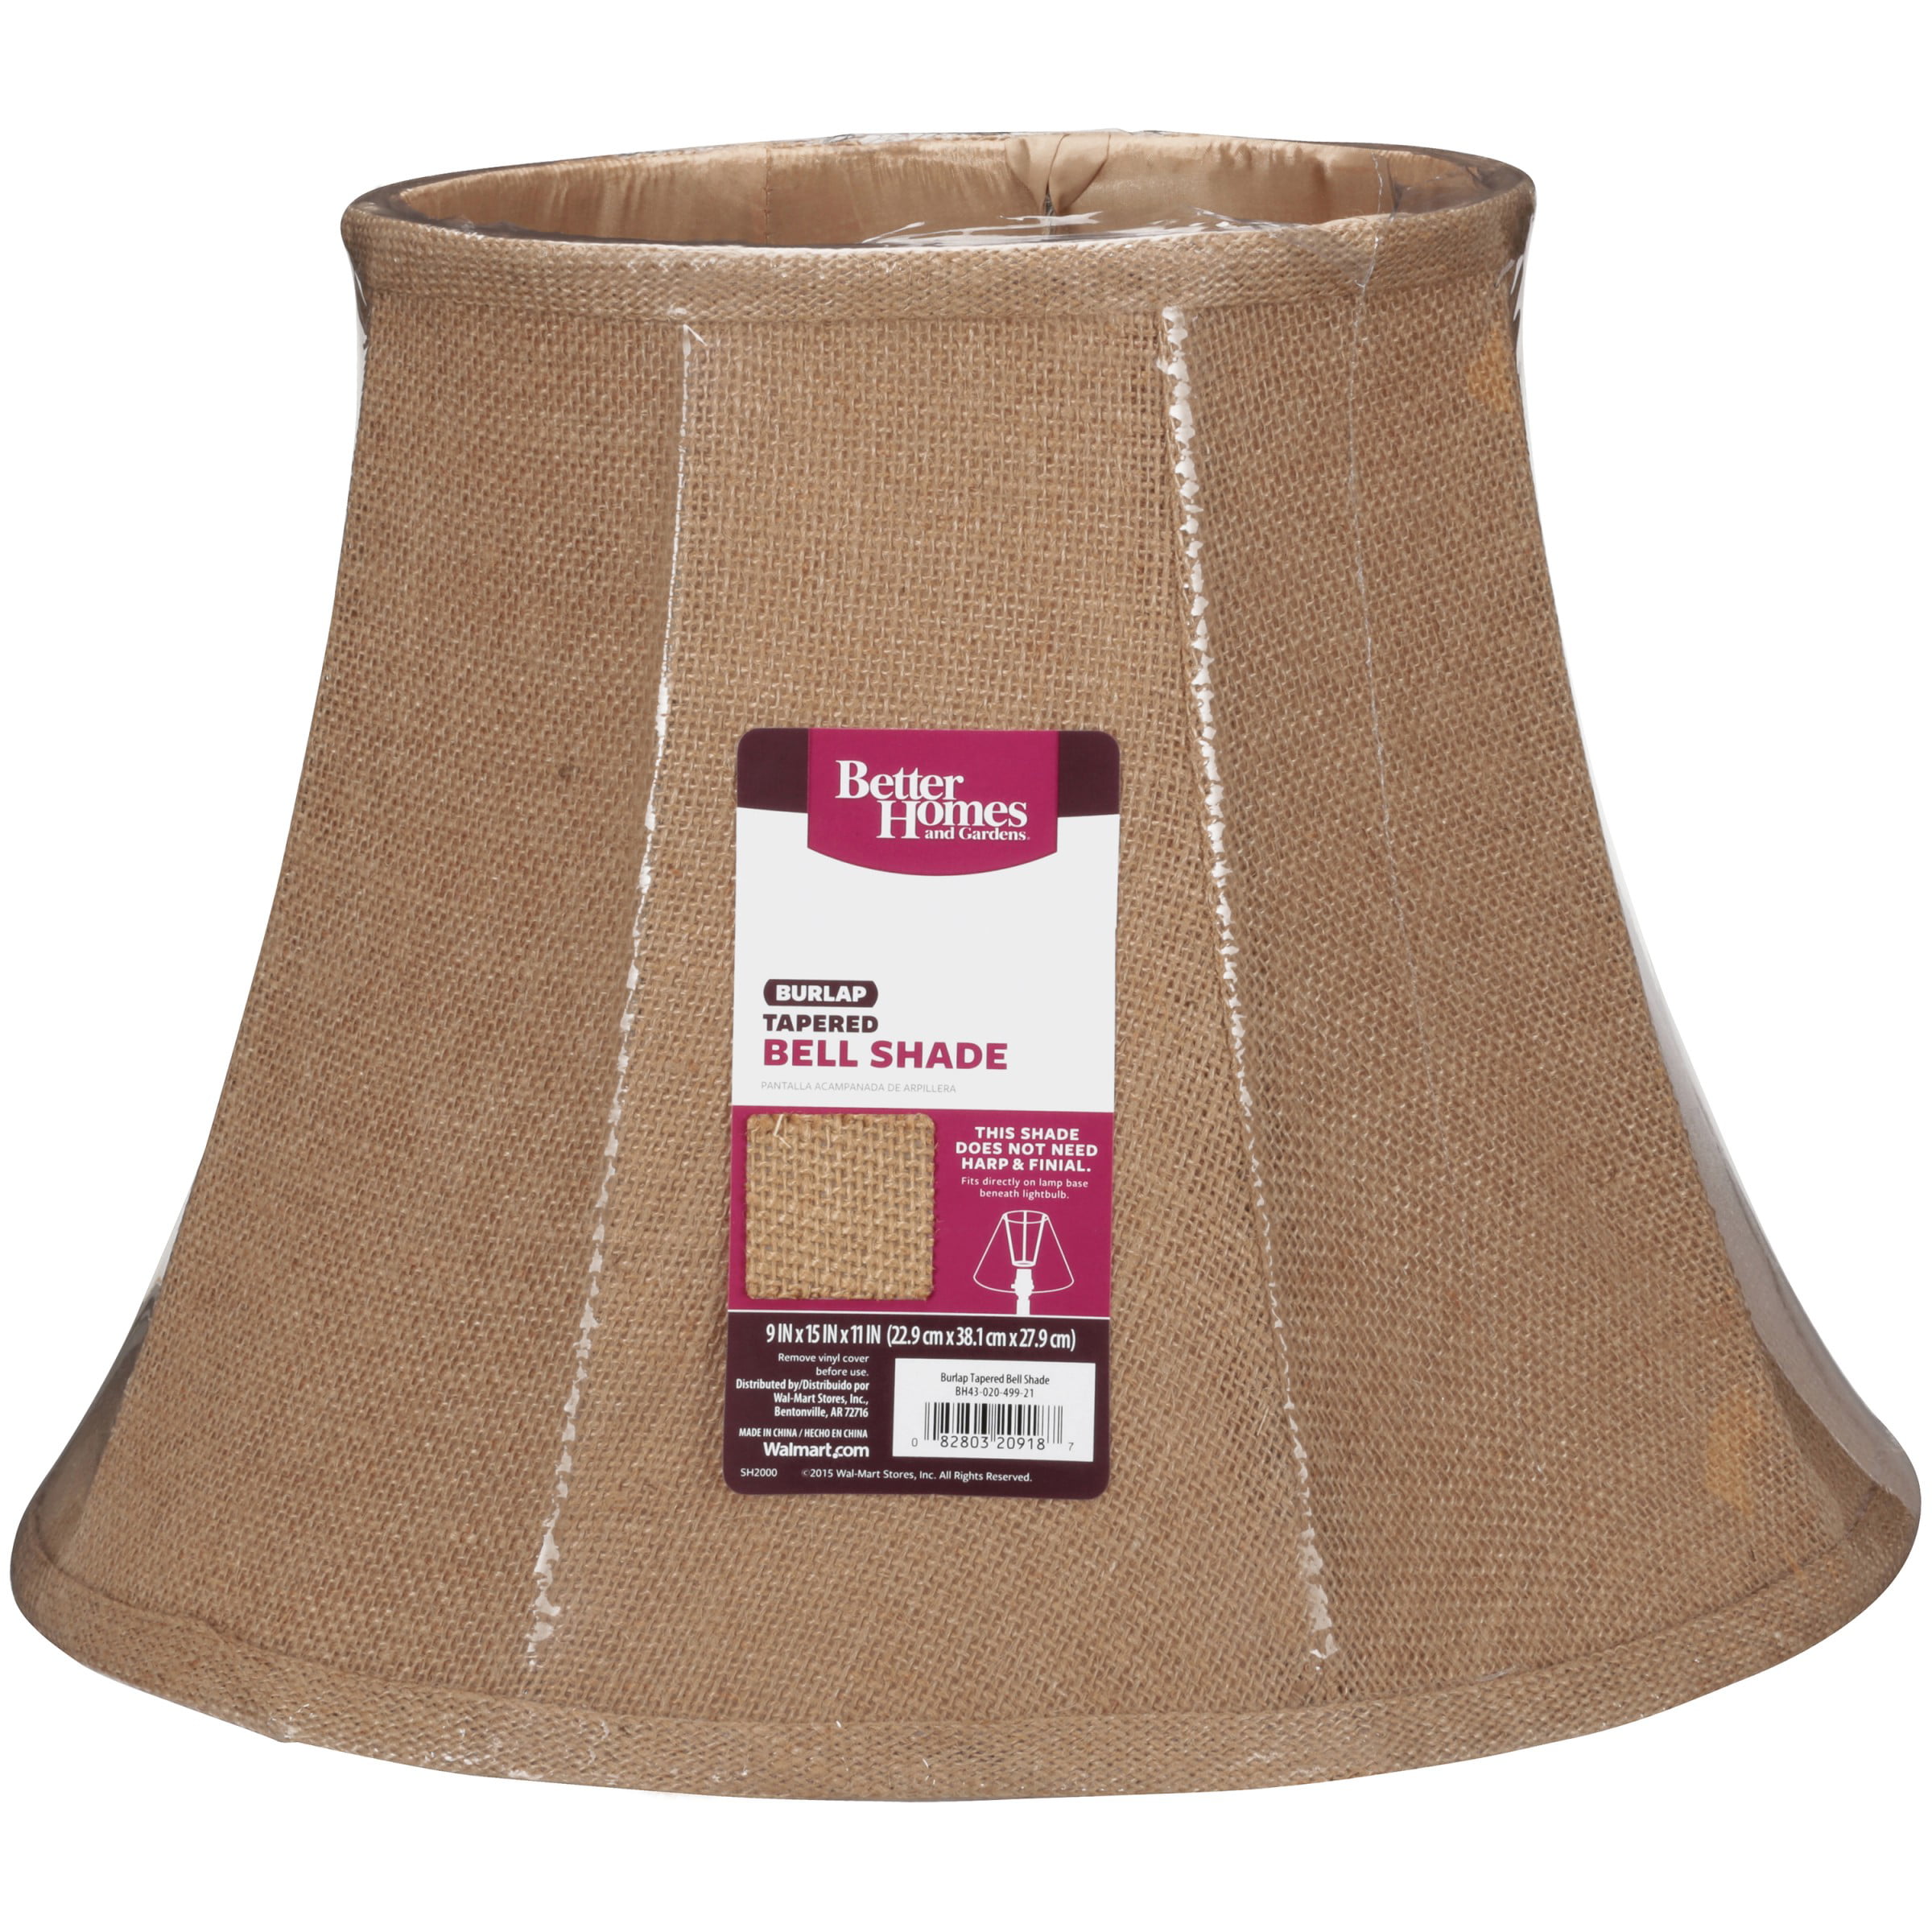 Better Homes And Gardens Burlap Tapered Bell Shade Walmart Com